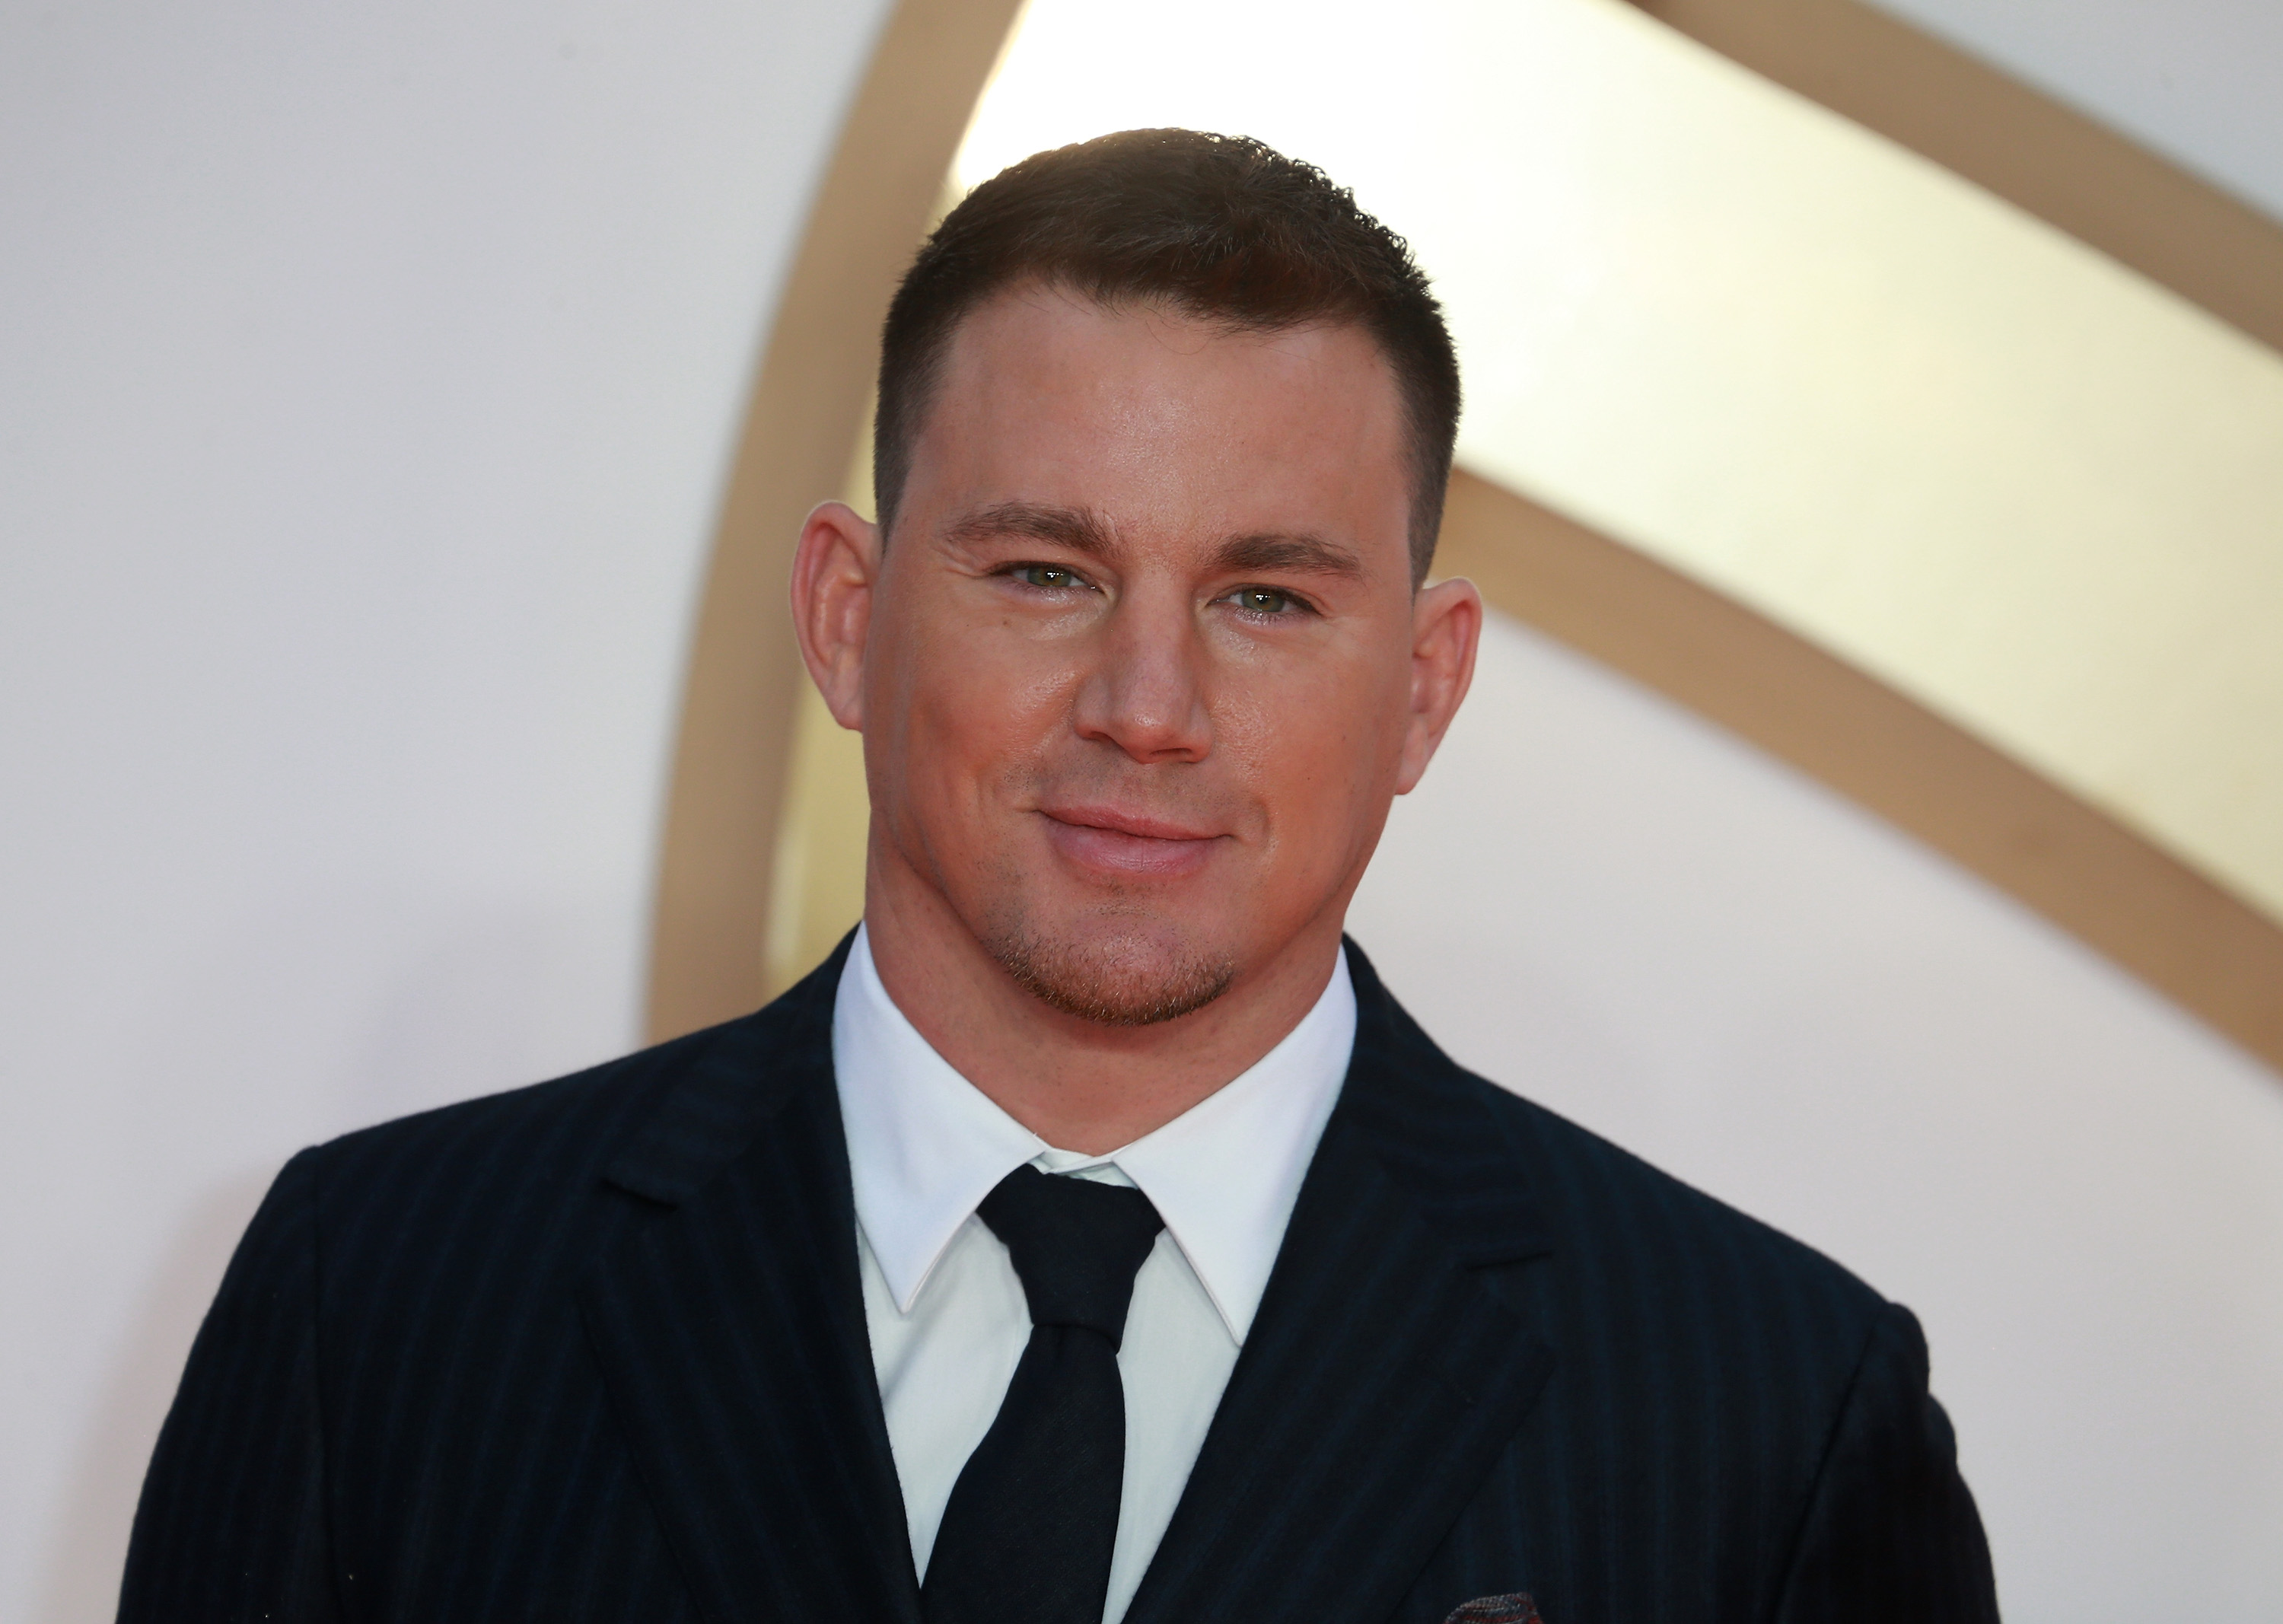 Channing Tatum attends  the 'Kingsman: The Golden Circle' World Premiere held at Odeon Leicester Square on September 18, 2017 in London, England. (Fred Duval&mdash;FilmMagic/Getty Images)